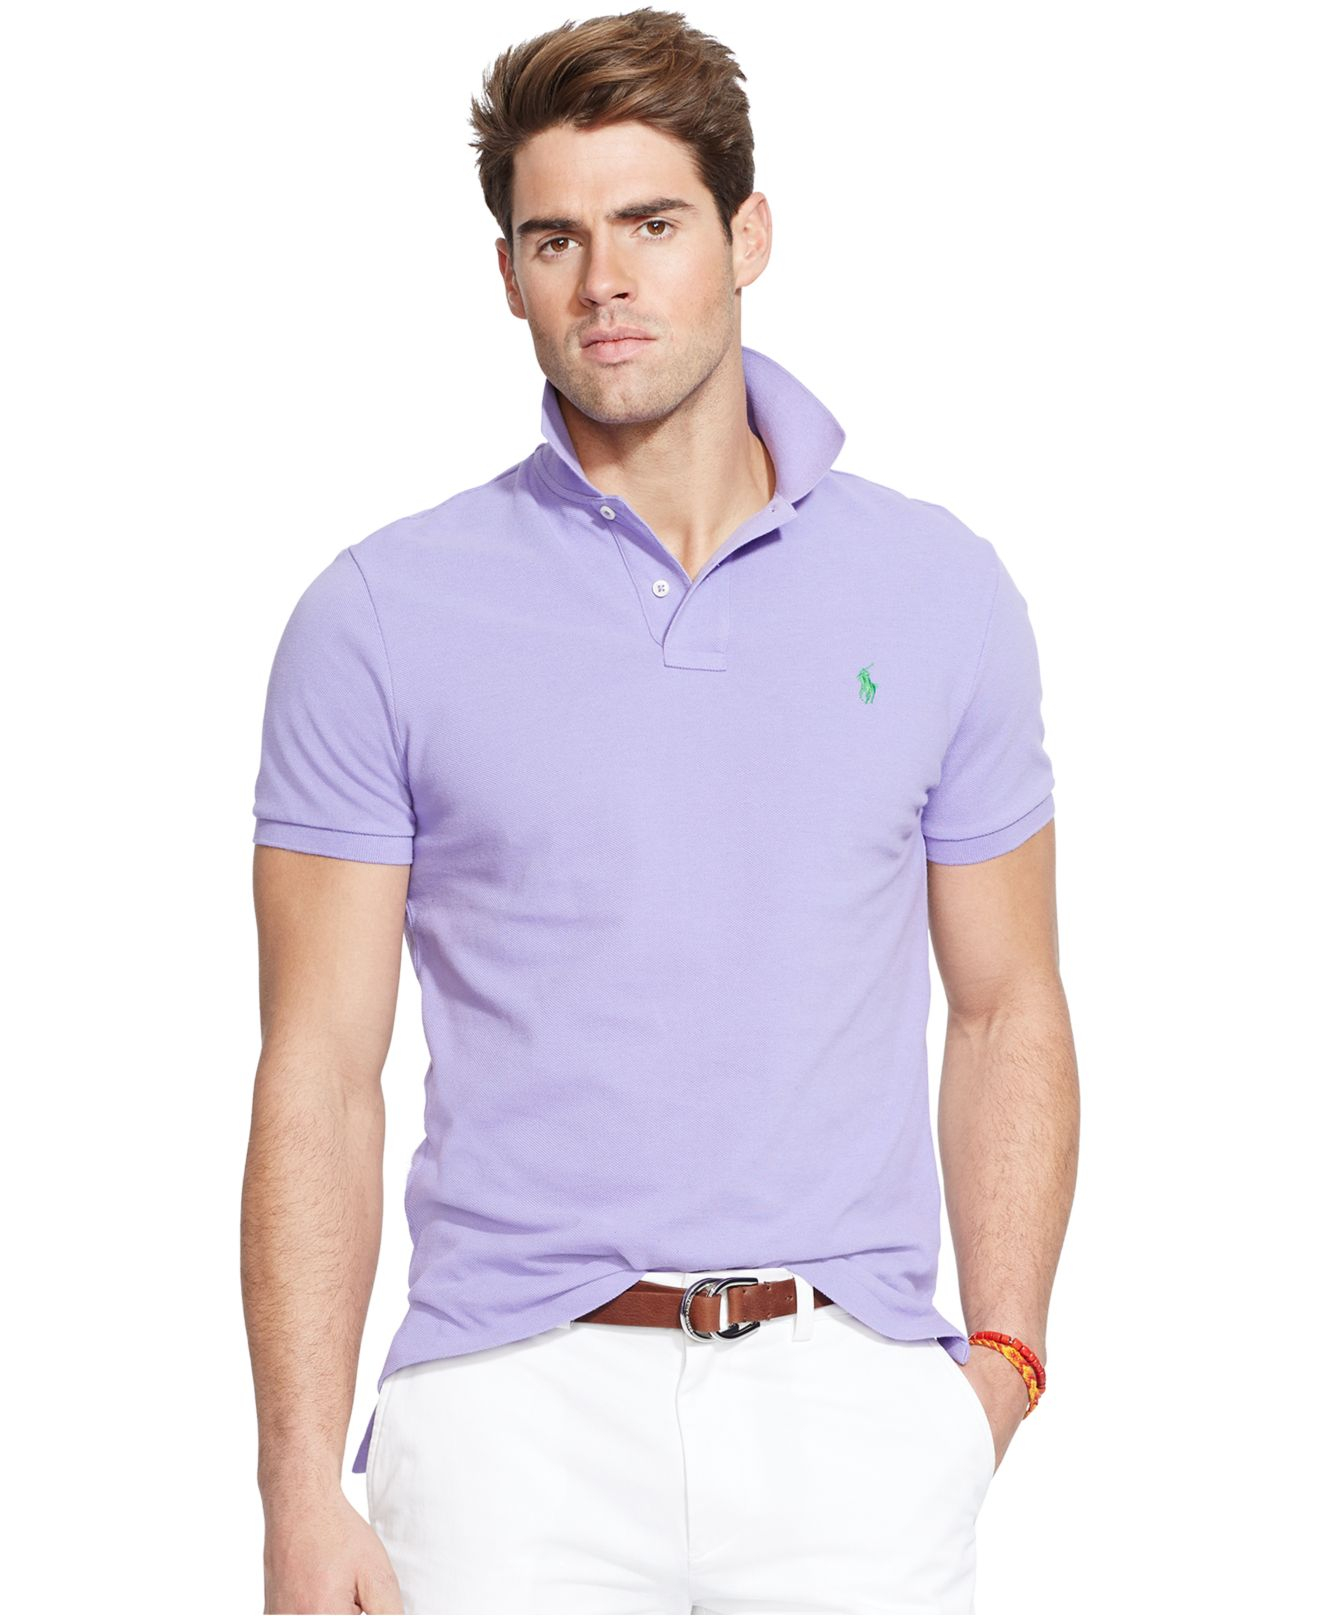 Lyst Polo  Ralph  Lauren  Classic fit Mesh Polo  in Purple 